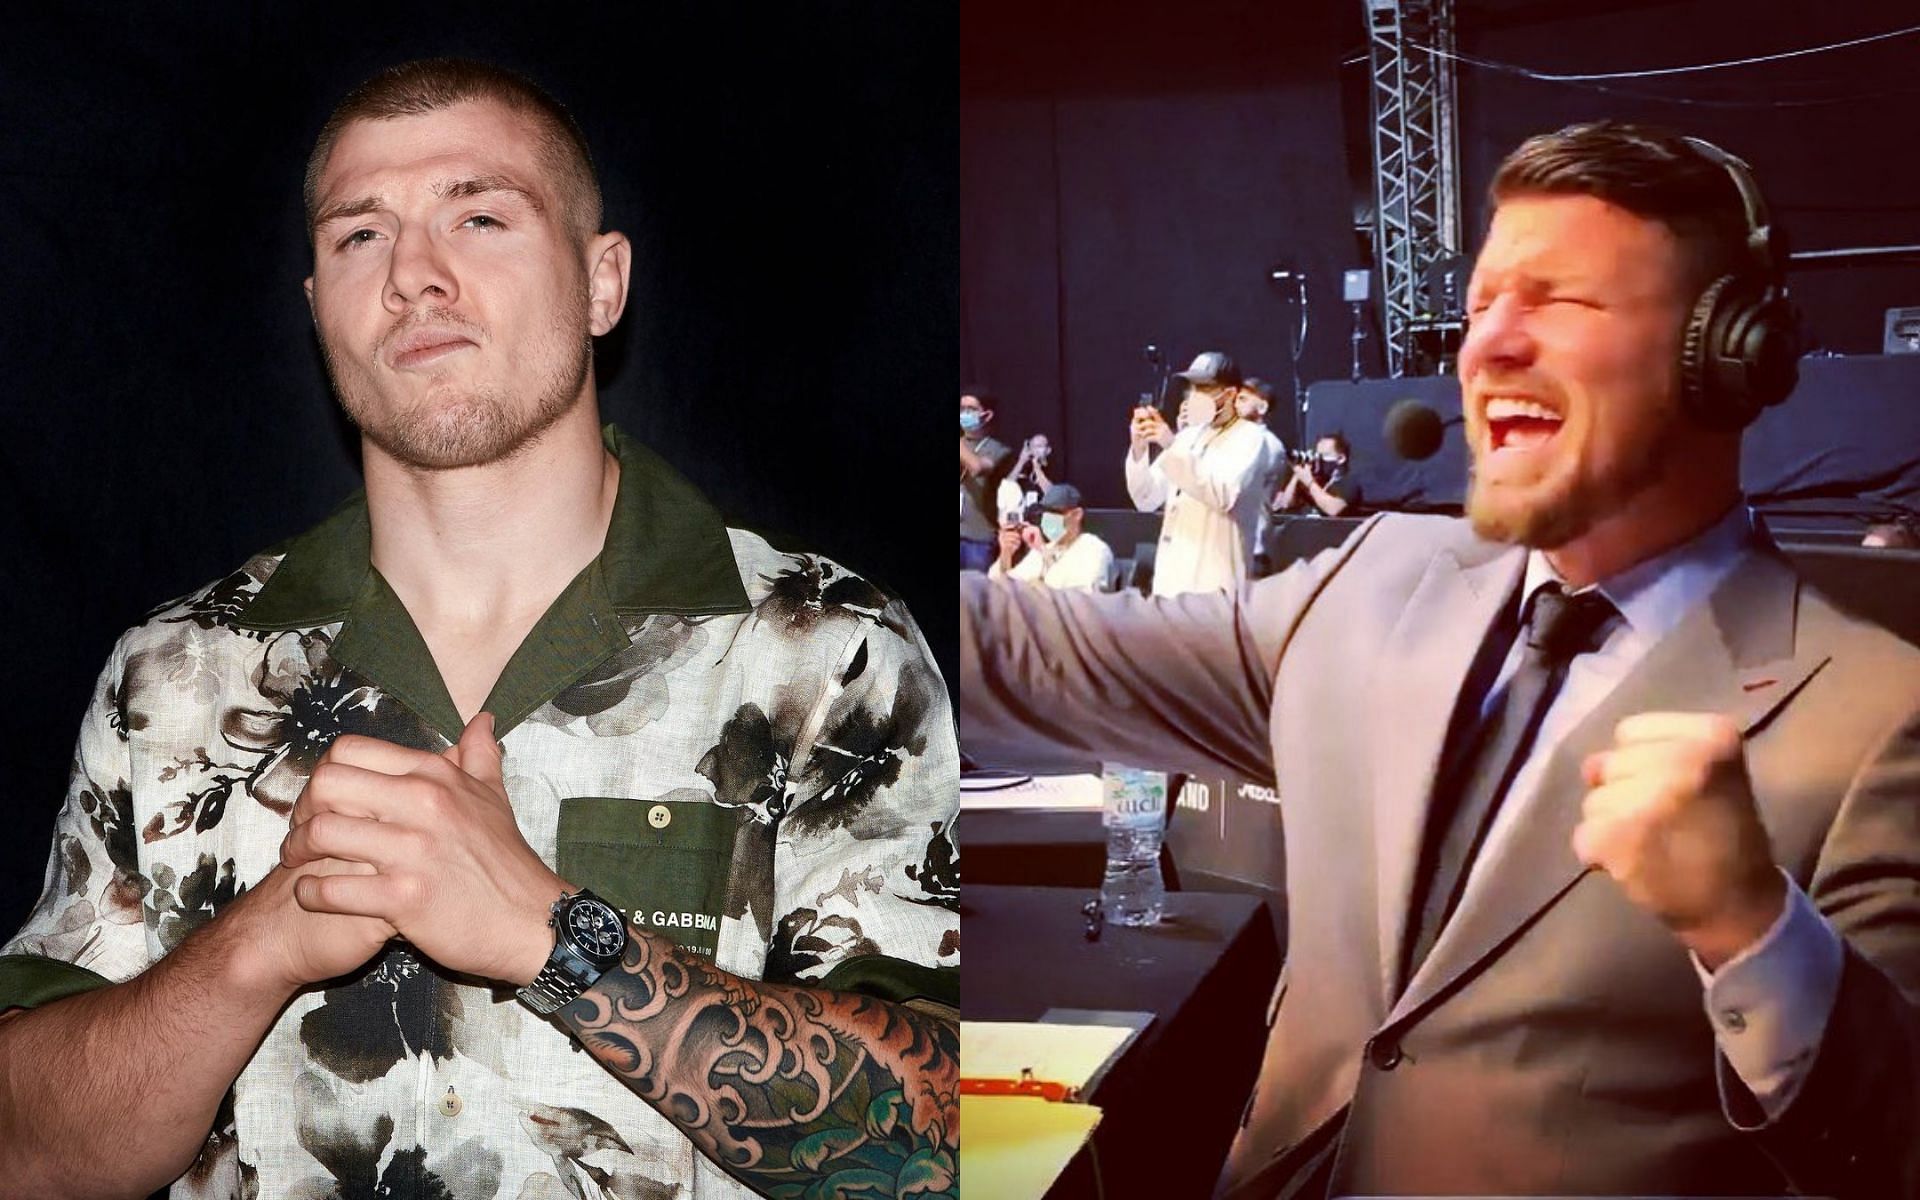 Marvin Vettori (left) &amp; Michael Bisping (right) [Image Credits- @marvinvettori &amp; @mikebisping on Instagram]